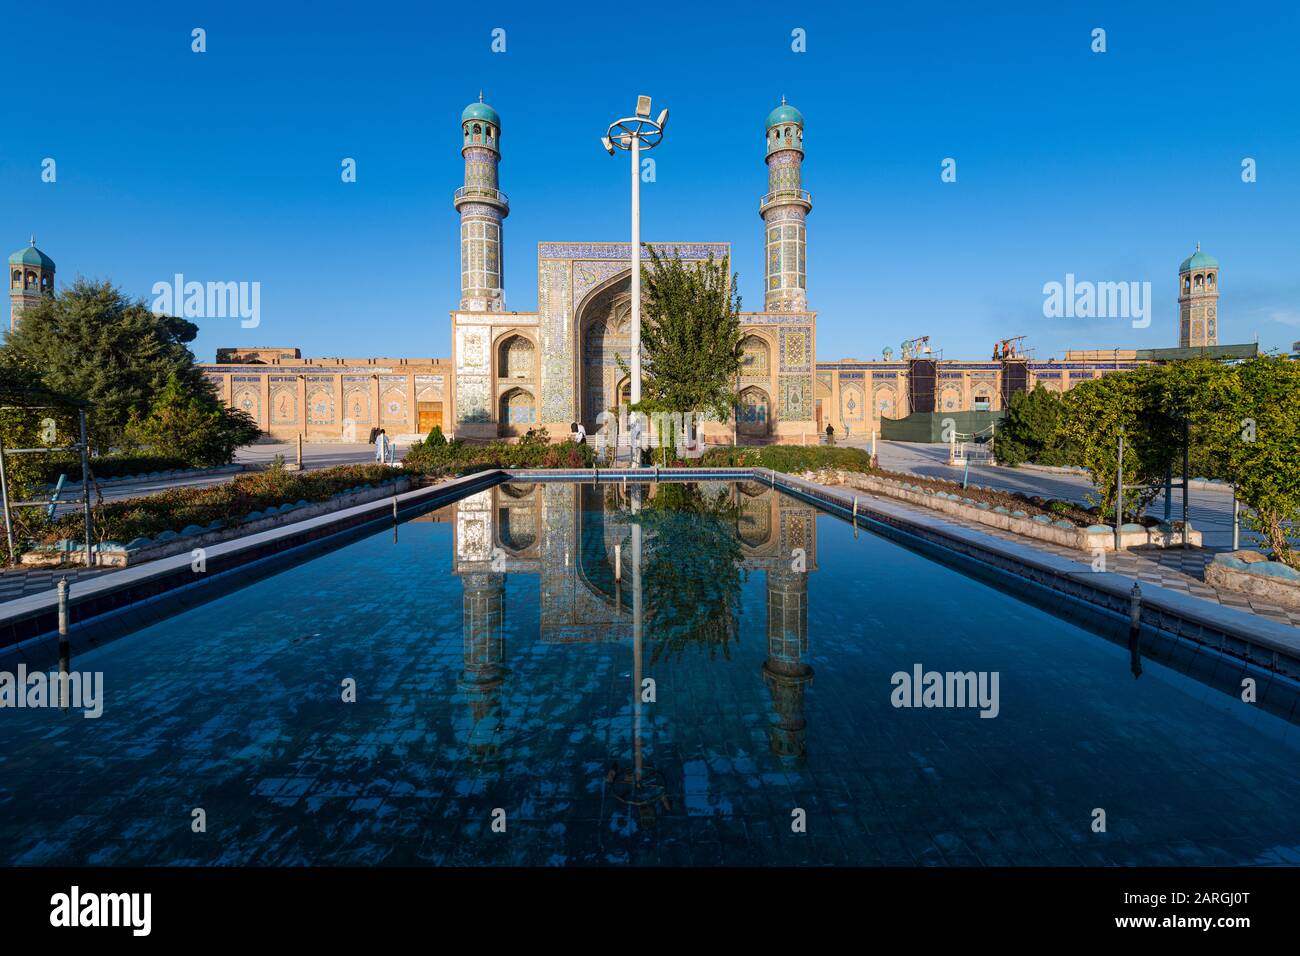 Great Mosque of Herat, Afghanistan, Asia Stock Photo